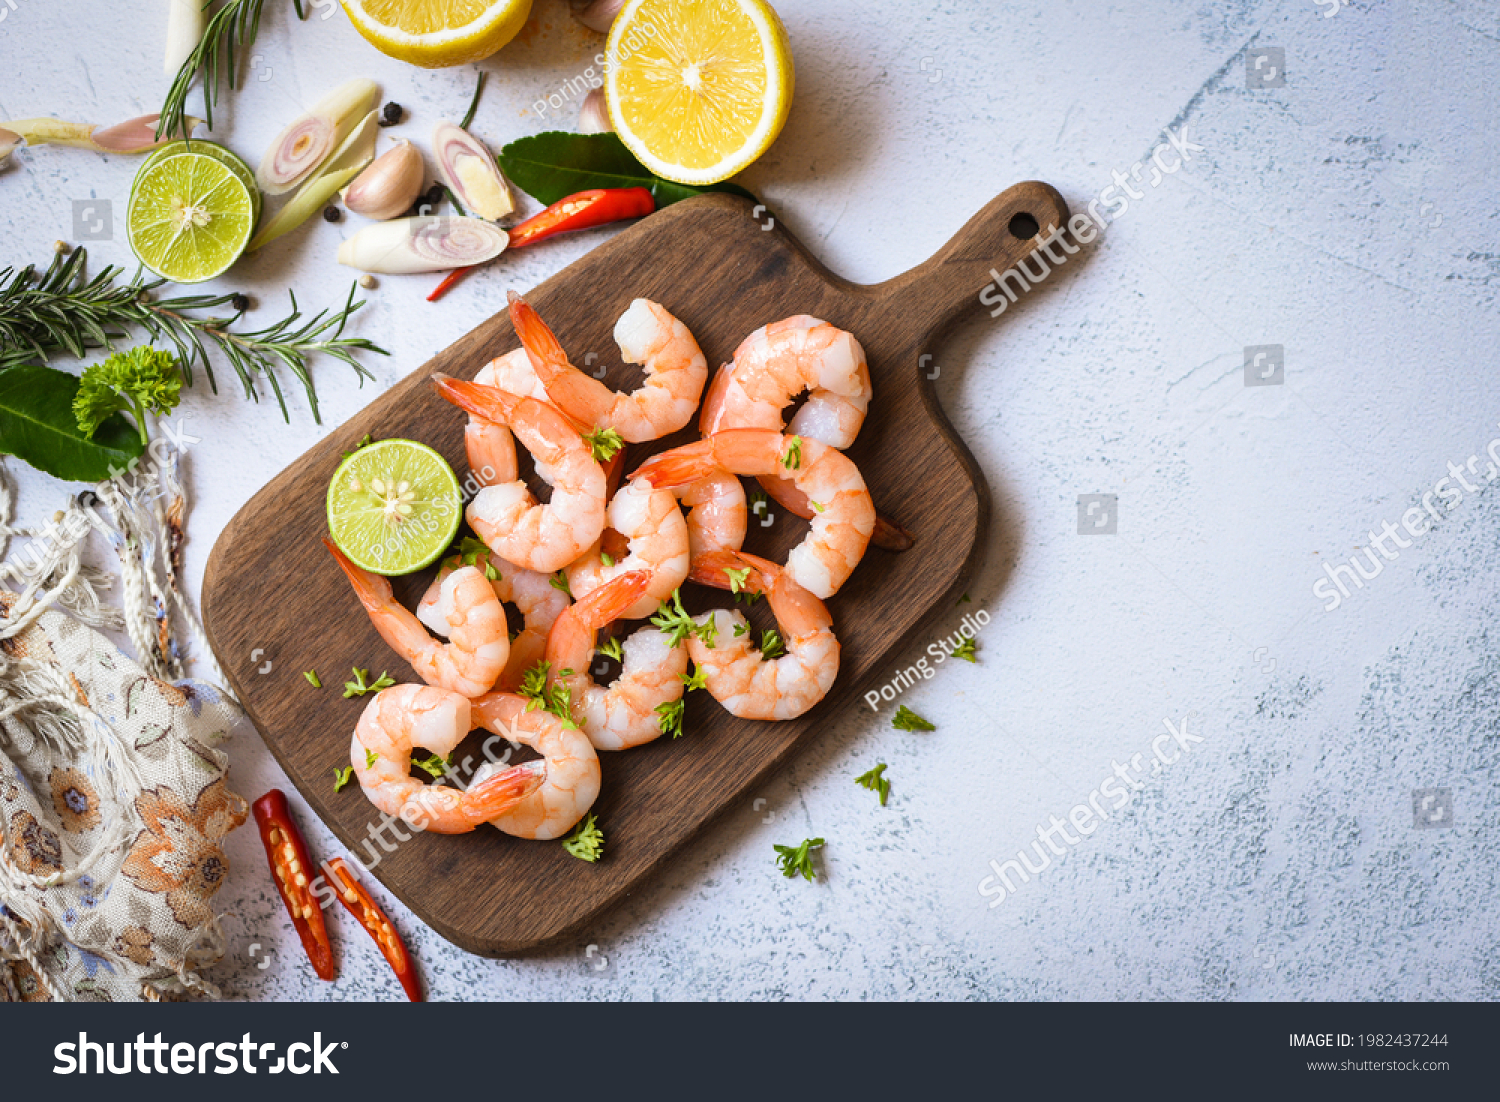 Shrimp peeled on wooden cutting board background on the table food kitchen, Fresh shrimps prawns seafood lemon lime with herbs and spice #1982437244